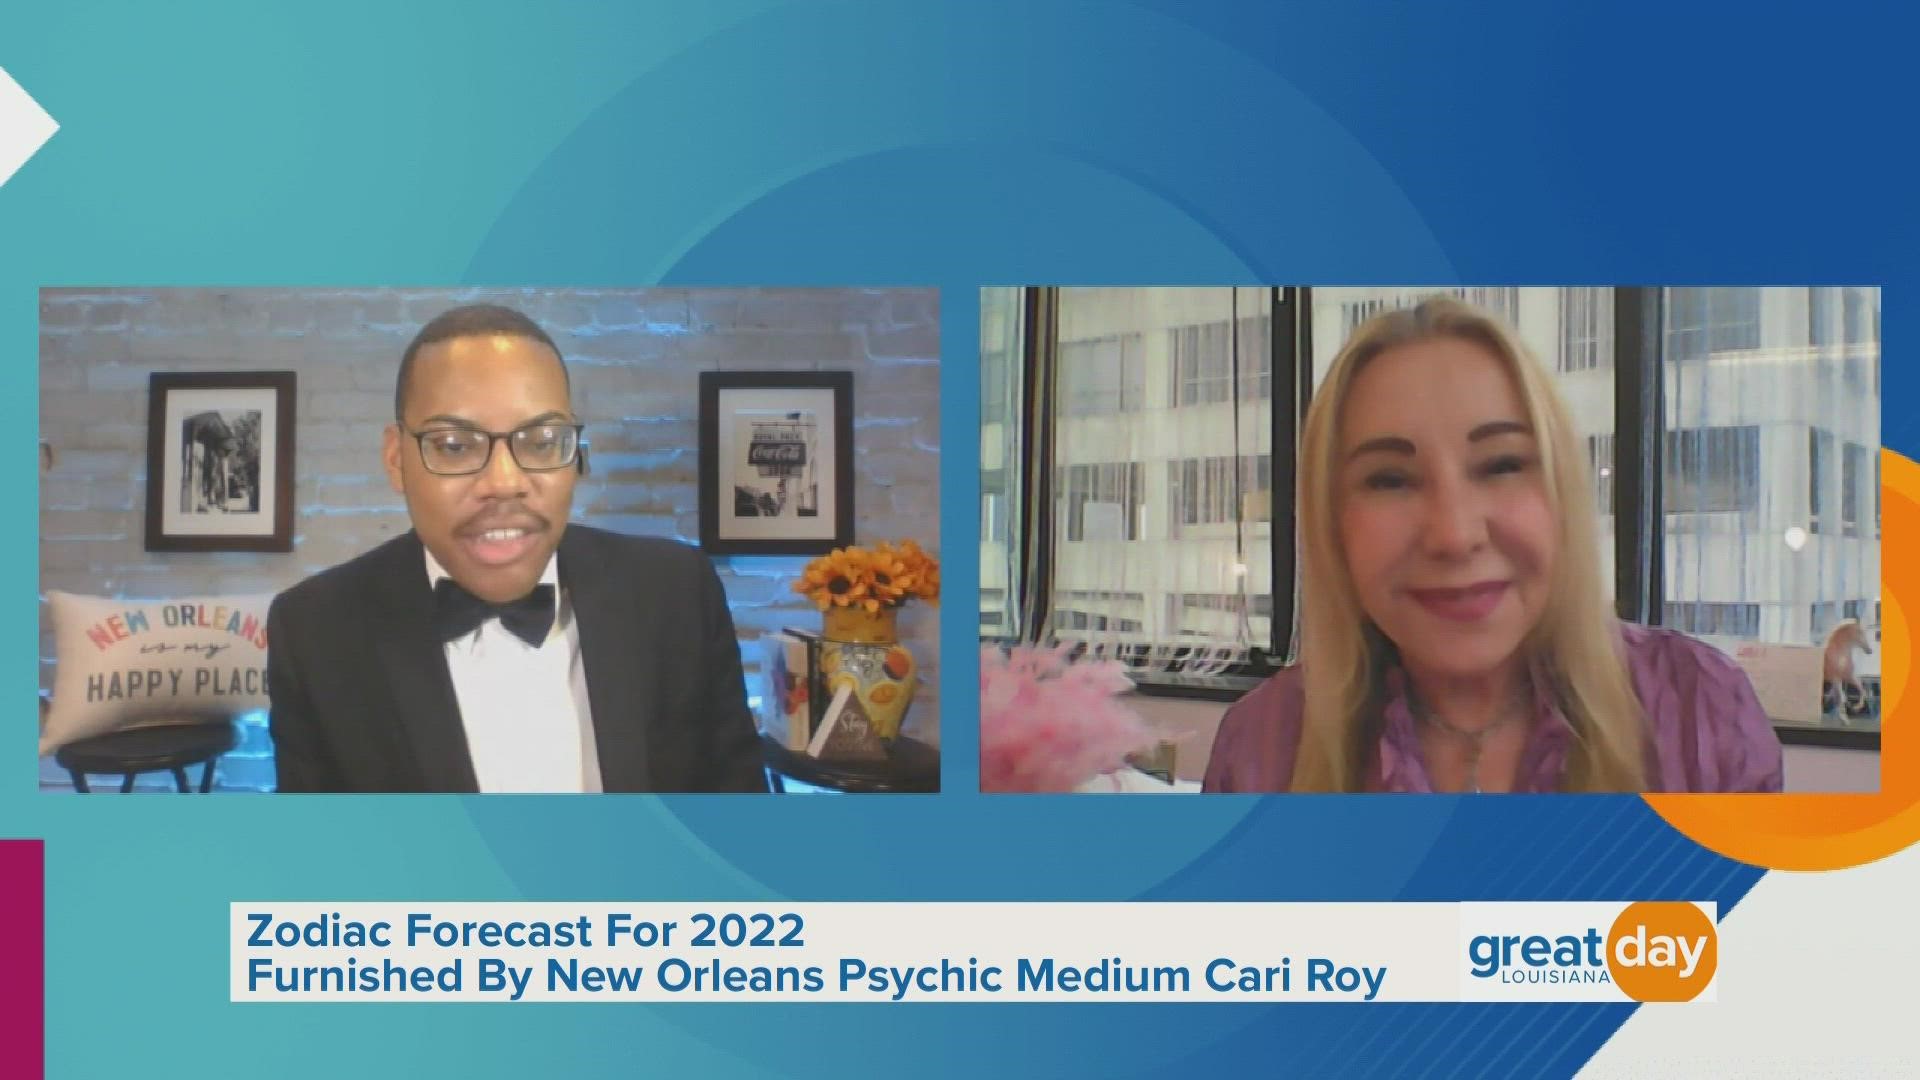 Psychic medium Cari Roy shared what the first six Zodiac signs should focus on in 2022.